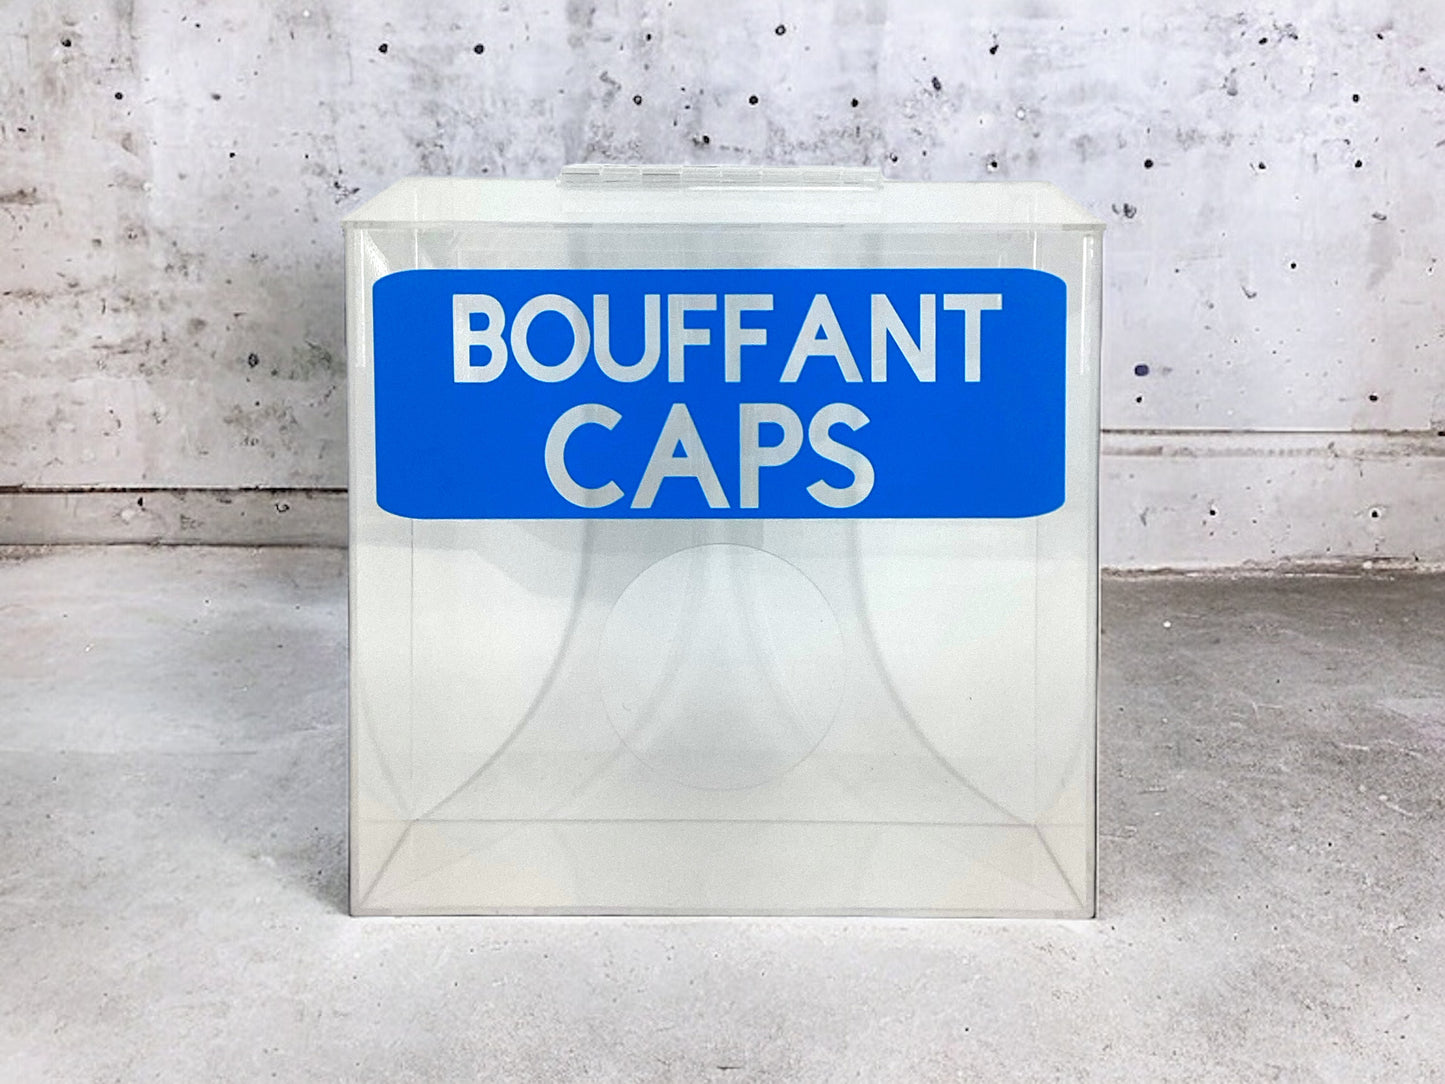 Clear Acrylic Wall Mounted Bouffant Caps Storage Dispenser